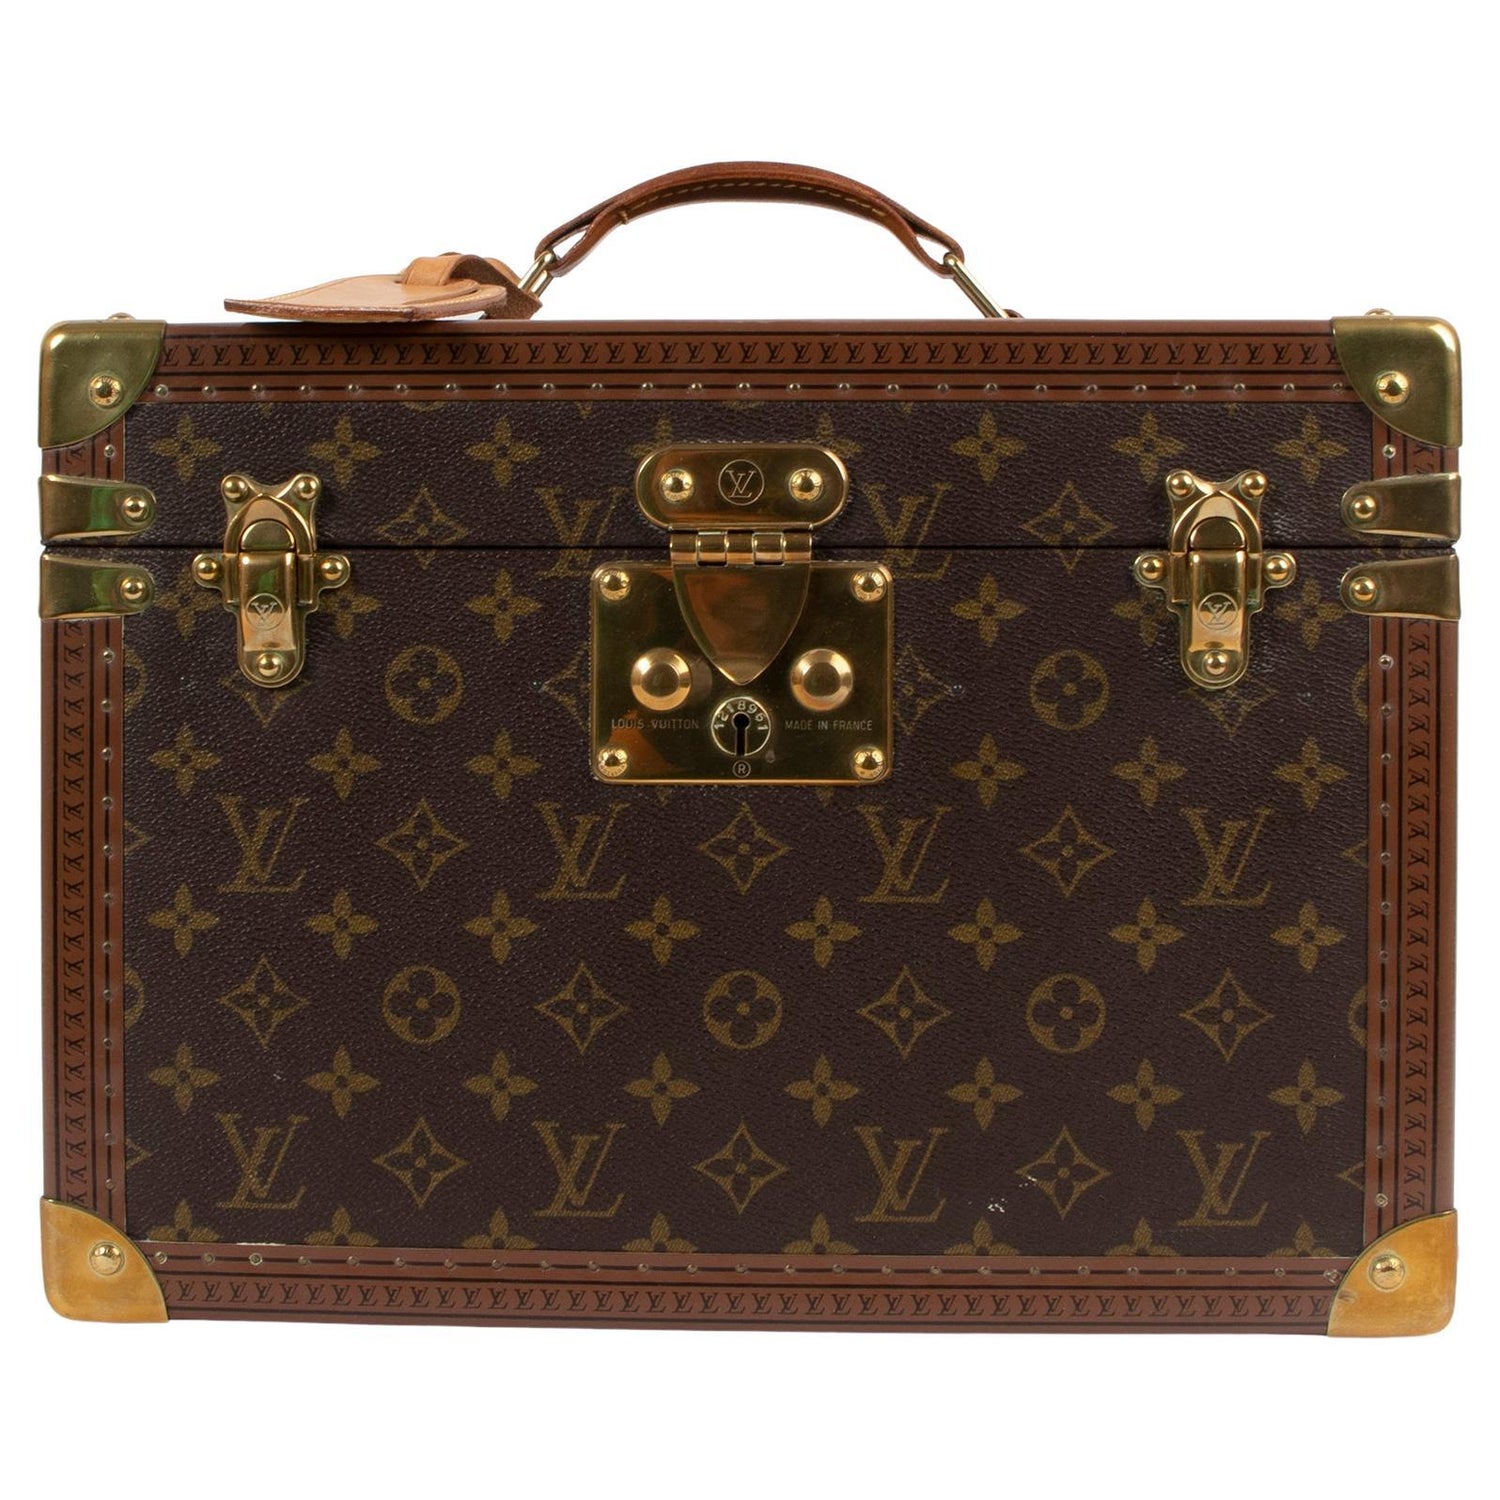 Louis Vuitton Cosmetic Trunk - 2 For Sale on 1stDibs  pink louis vuitton  beauty trunk, louis vuitton beauty case trunk, louis vuitton makeup trunk  price